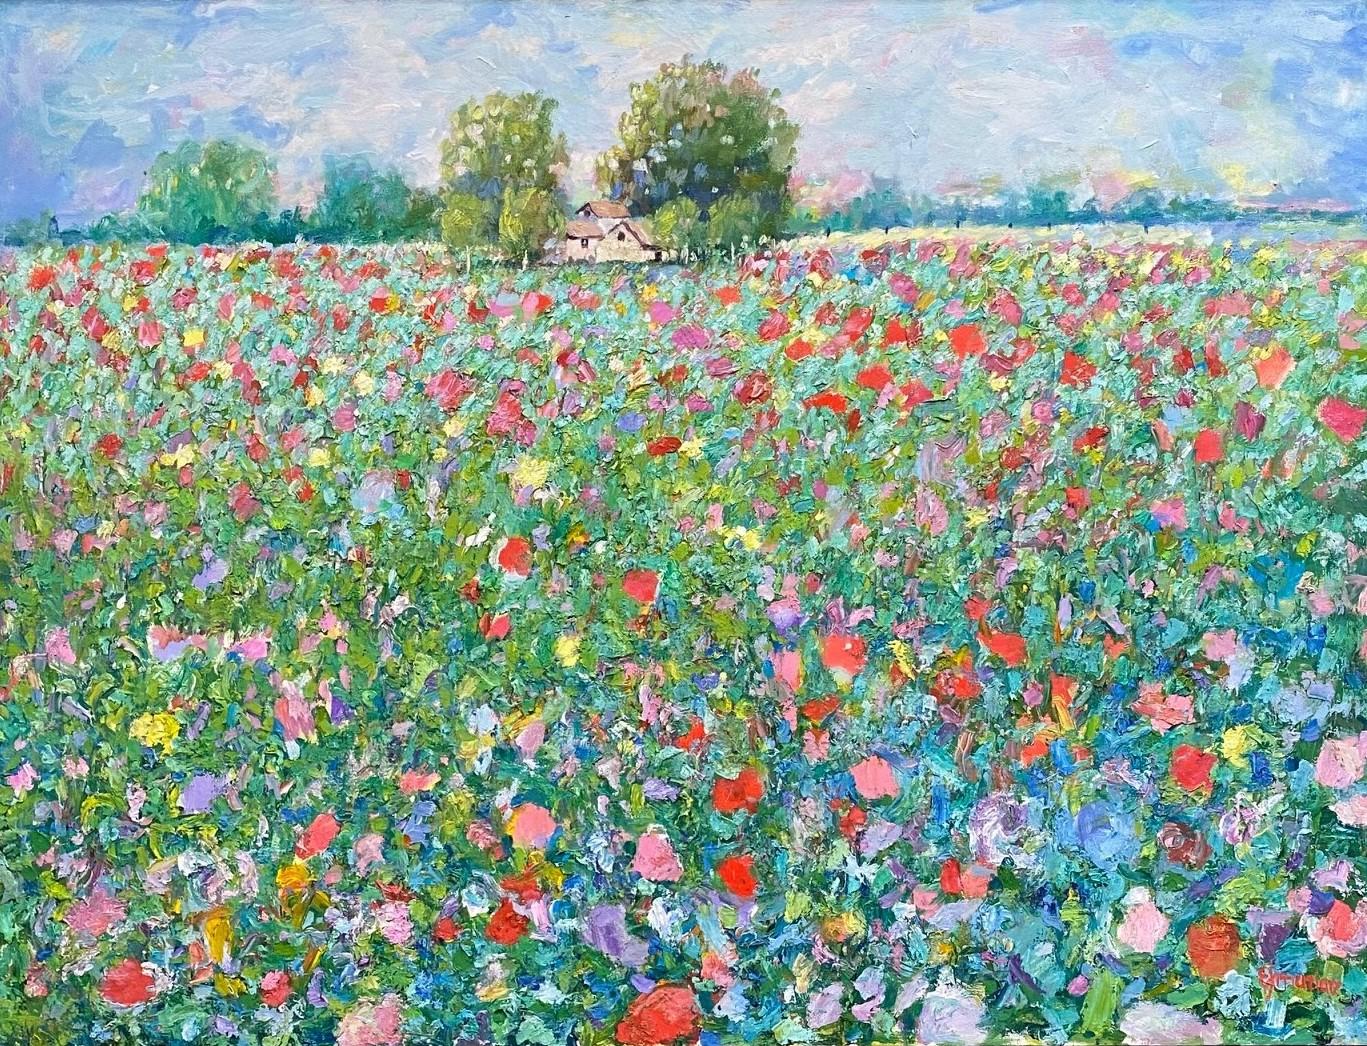 Homestead of Flowers, original 30x40 contemporary French impressionist landscape - Painting by Eugene Maziarz